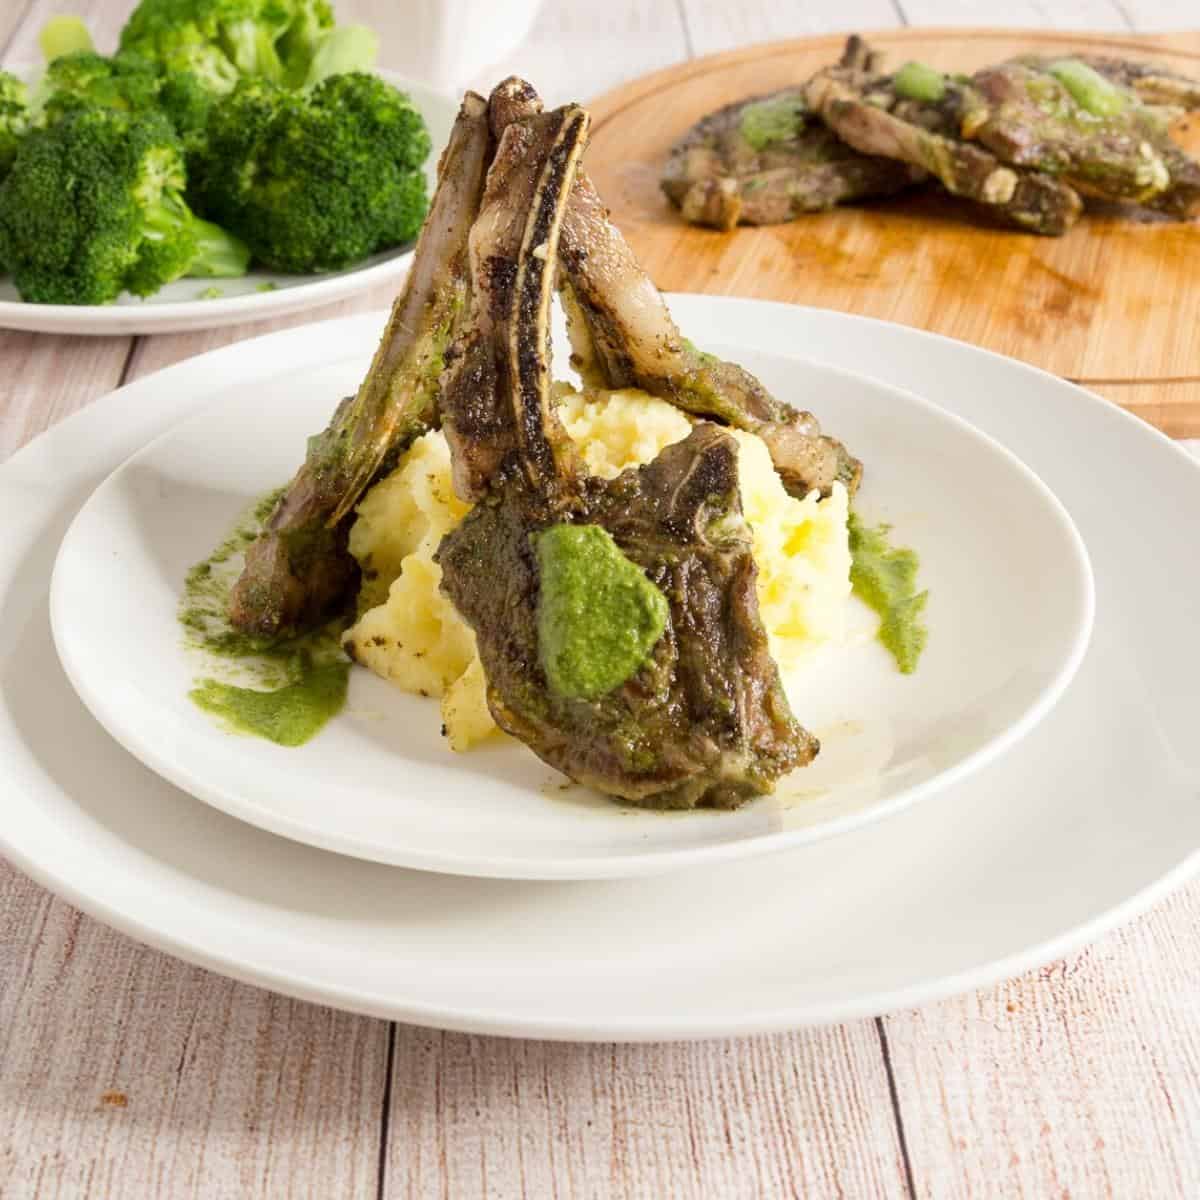 Mashed potato topped with lamb chops.